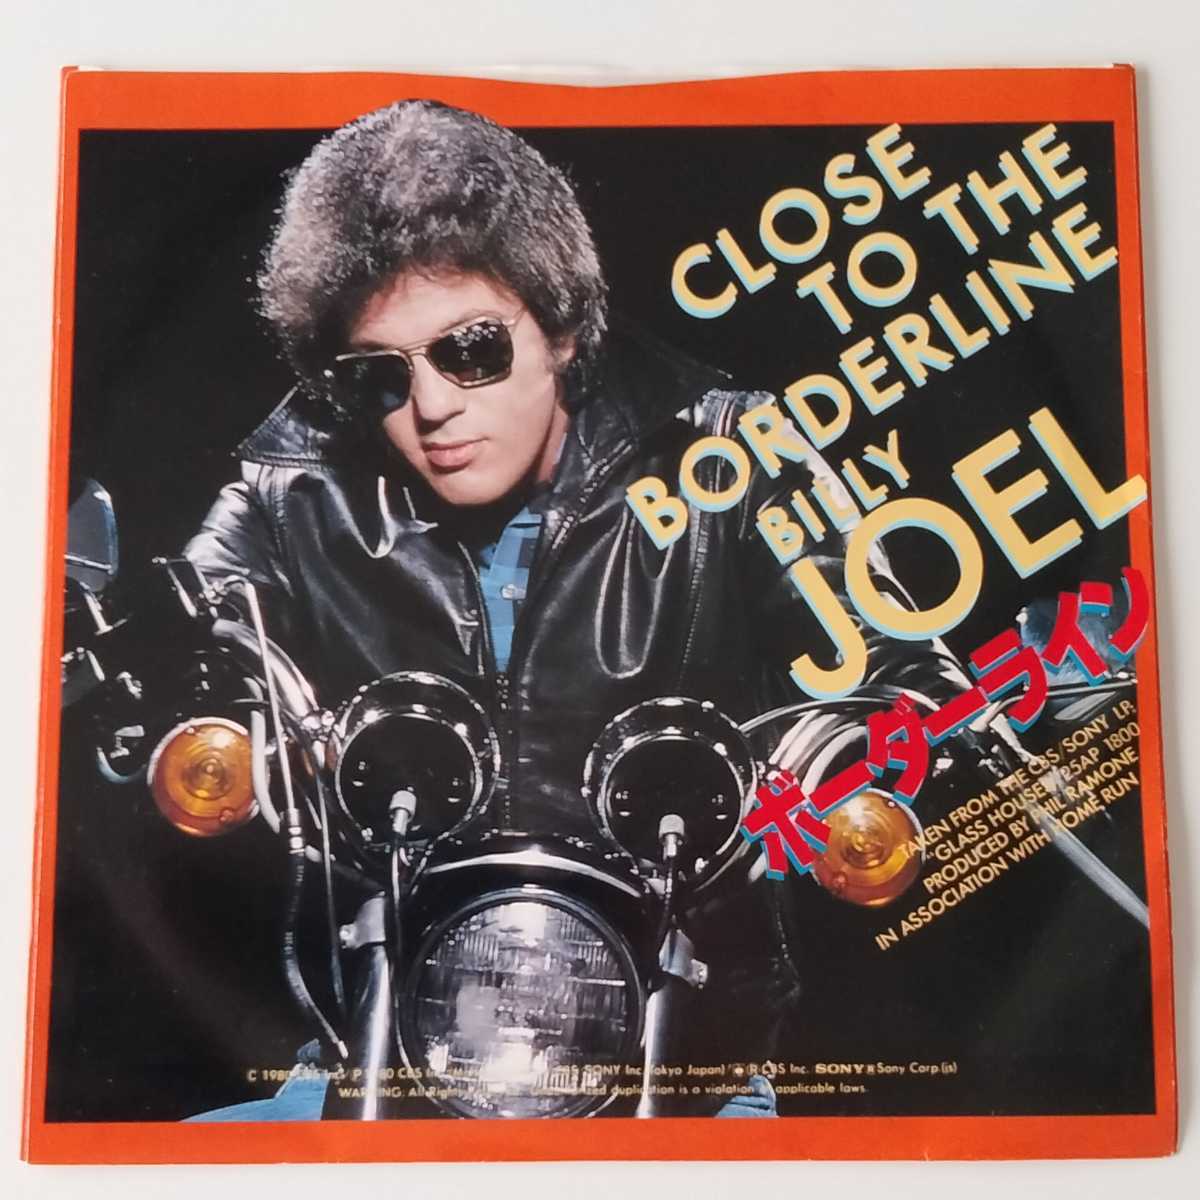 【7inch】BILLY JOEL / YOU MAY BE RIGHT (06SP-460) ビリー・ジョエル / ガラスのニューヨーク / CLOSE TO THE BORDERLINE ボーダーライン_画像2